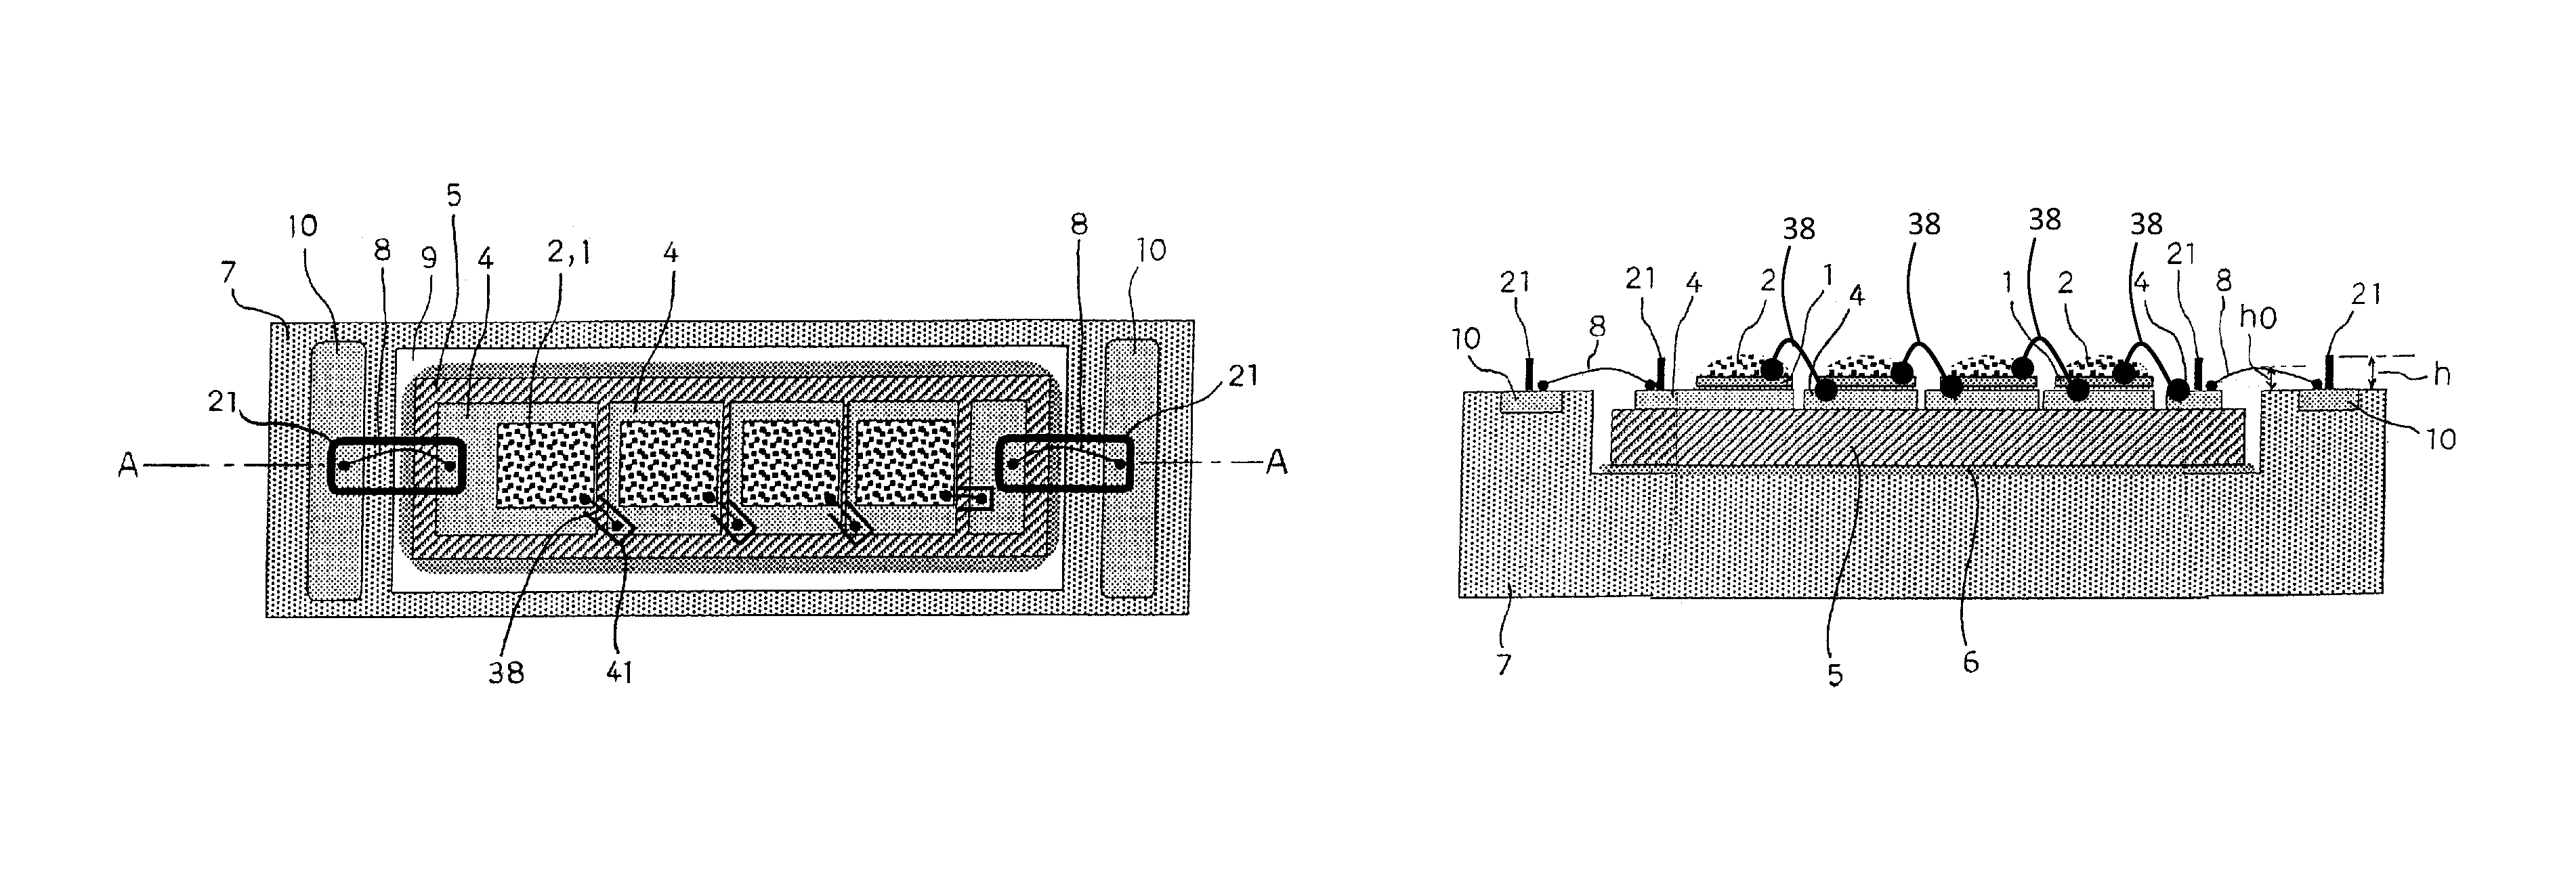 Light emitting diode (LED) light source and manufacturing method for the same